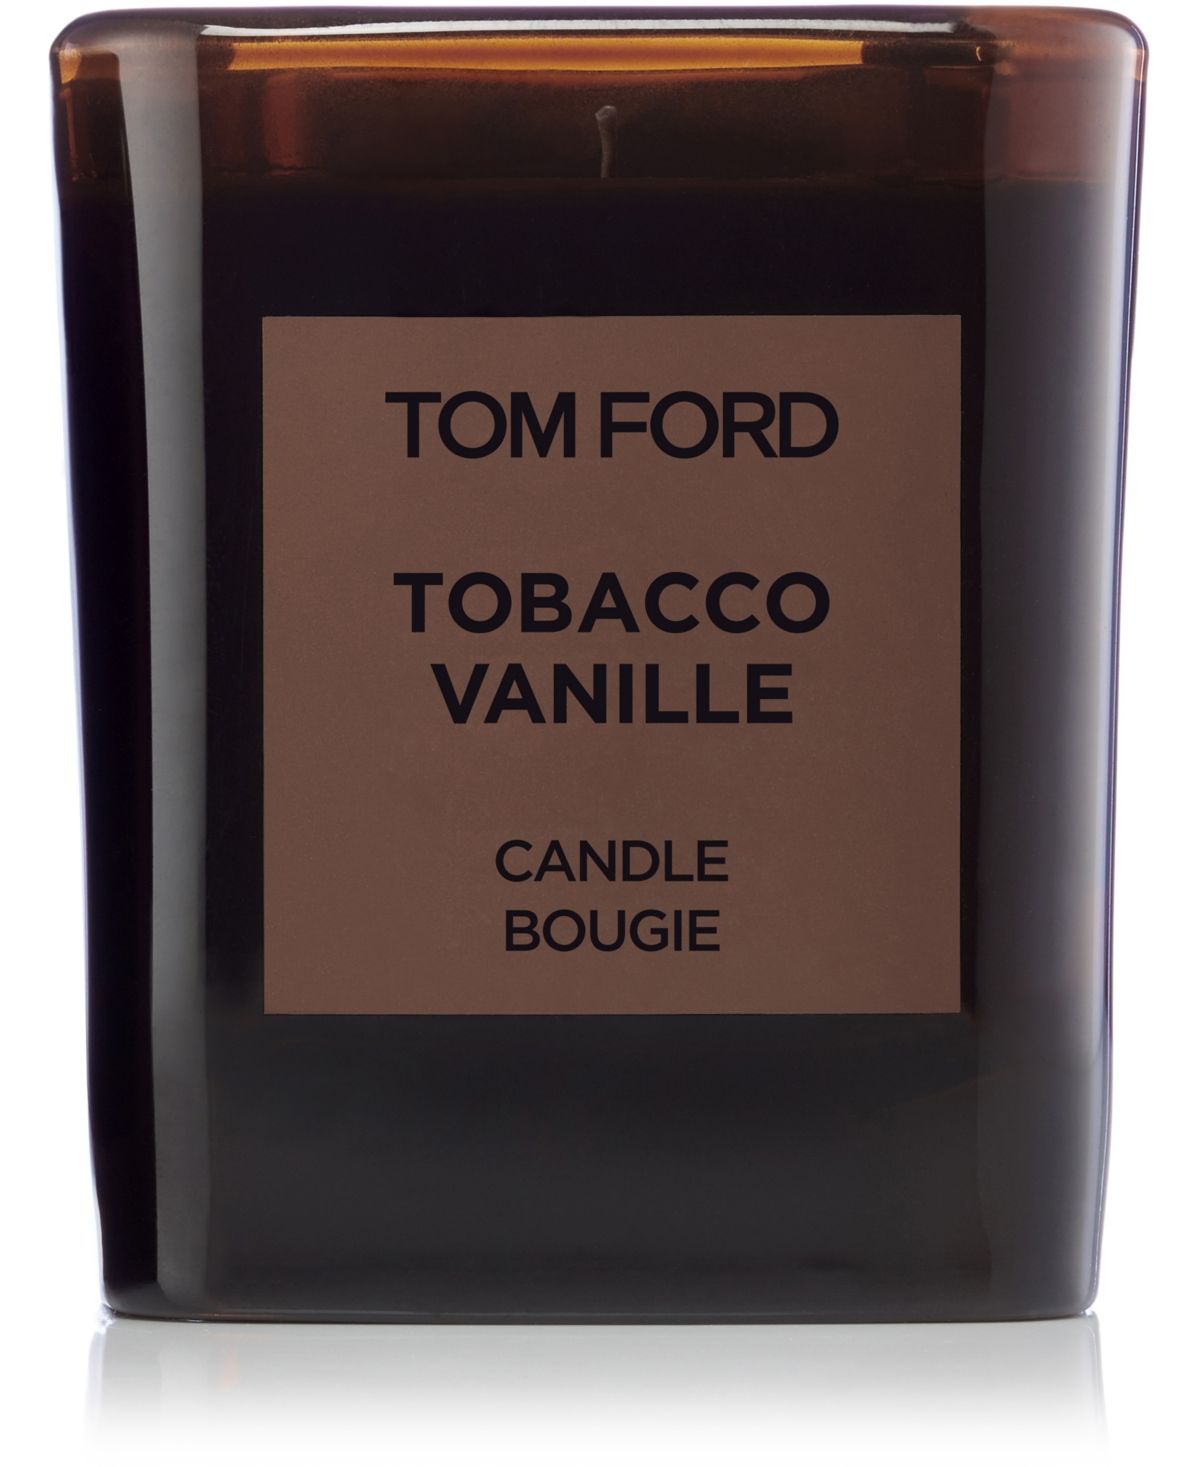 Tom Ford Private Blend Tobacco Vanille Candle, 21-oz. | Macys (US)